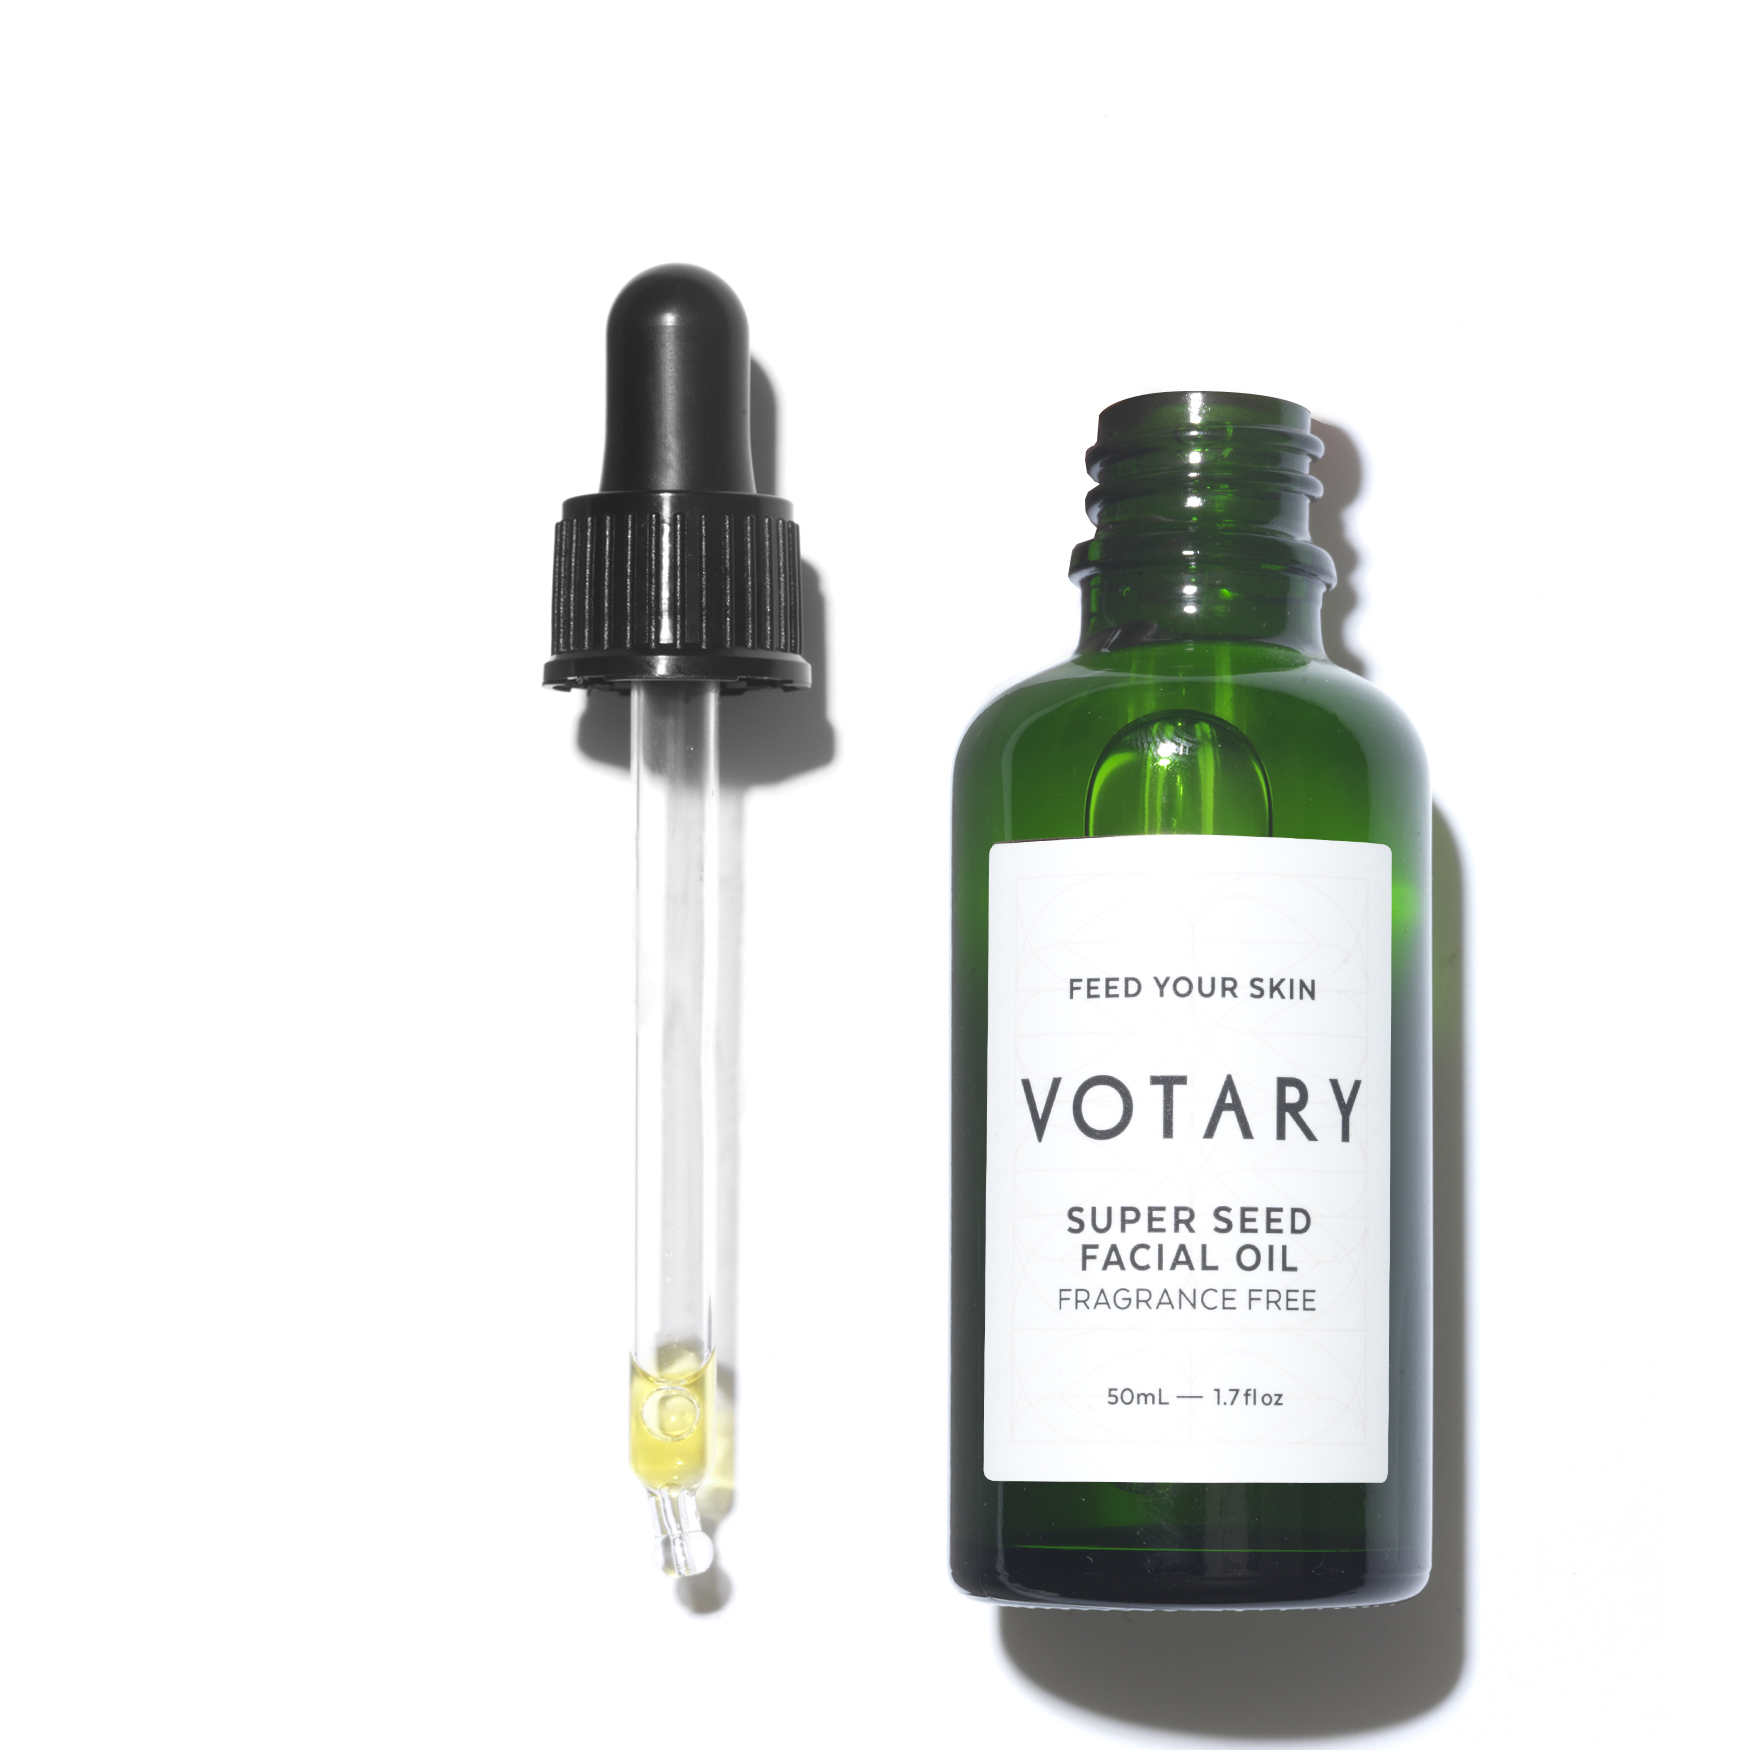 Votary Super Seed Facial Oil - Fragrance Free | Space NK